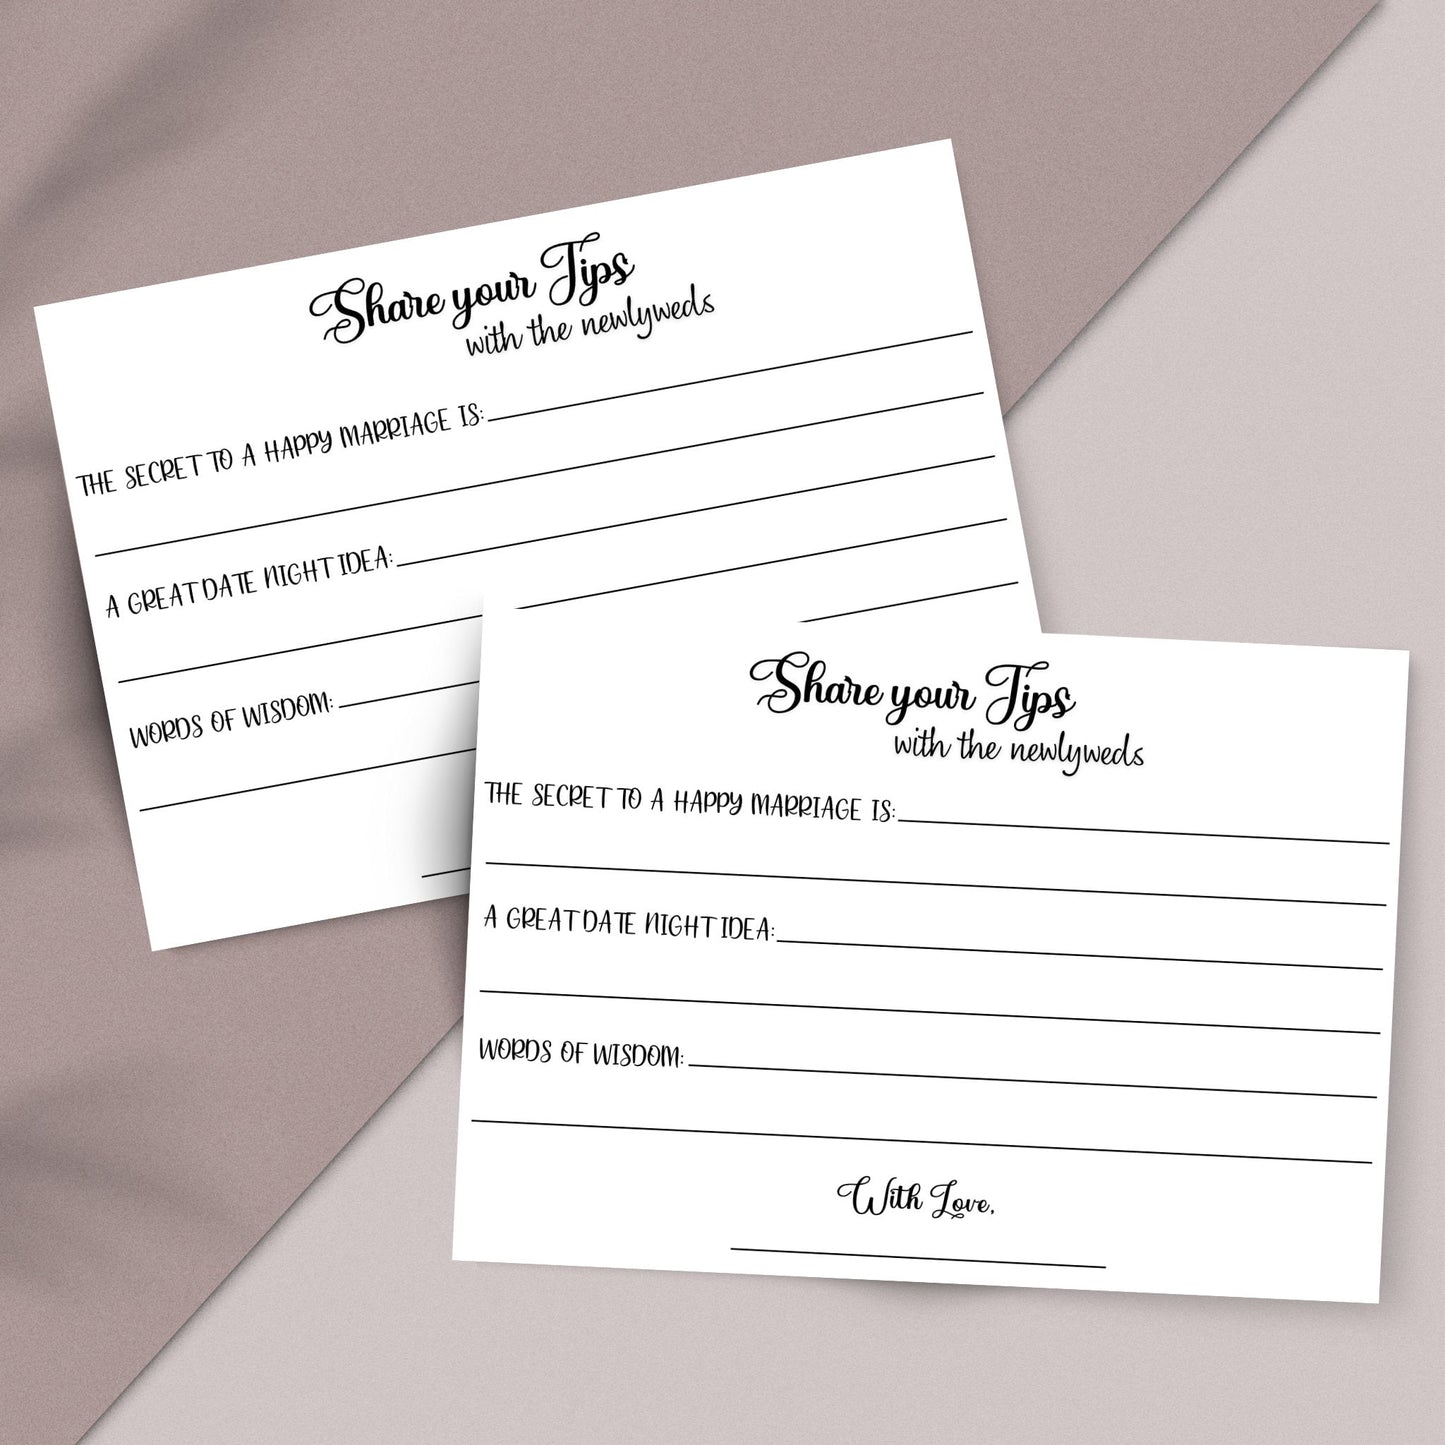 Wedding Advice And Wishes Card Printable, Minimalist Bridal Shower Party Game, Bride & Groom Wedding Shower, Couple Well Wishes Tip Jar Idea